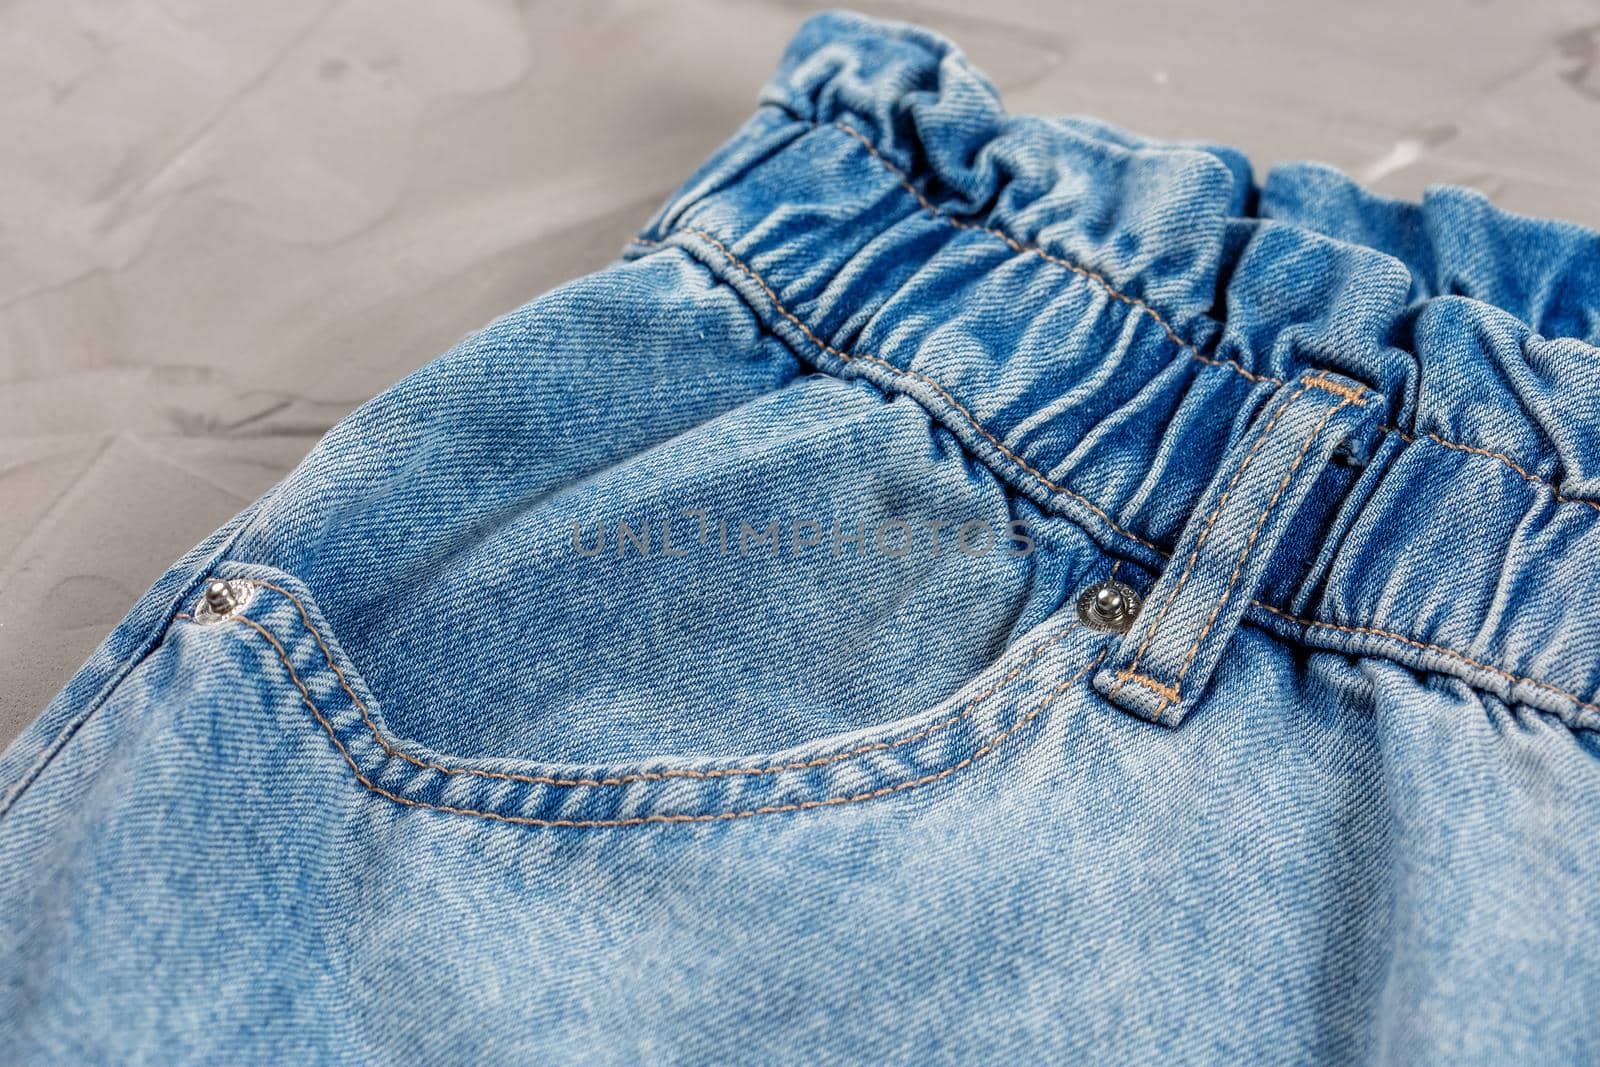 Close-up of blue jeans pocket showing fabric texture and stitching by galinasharapova